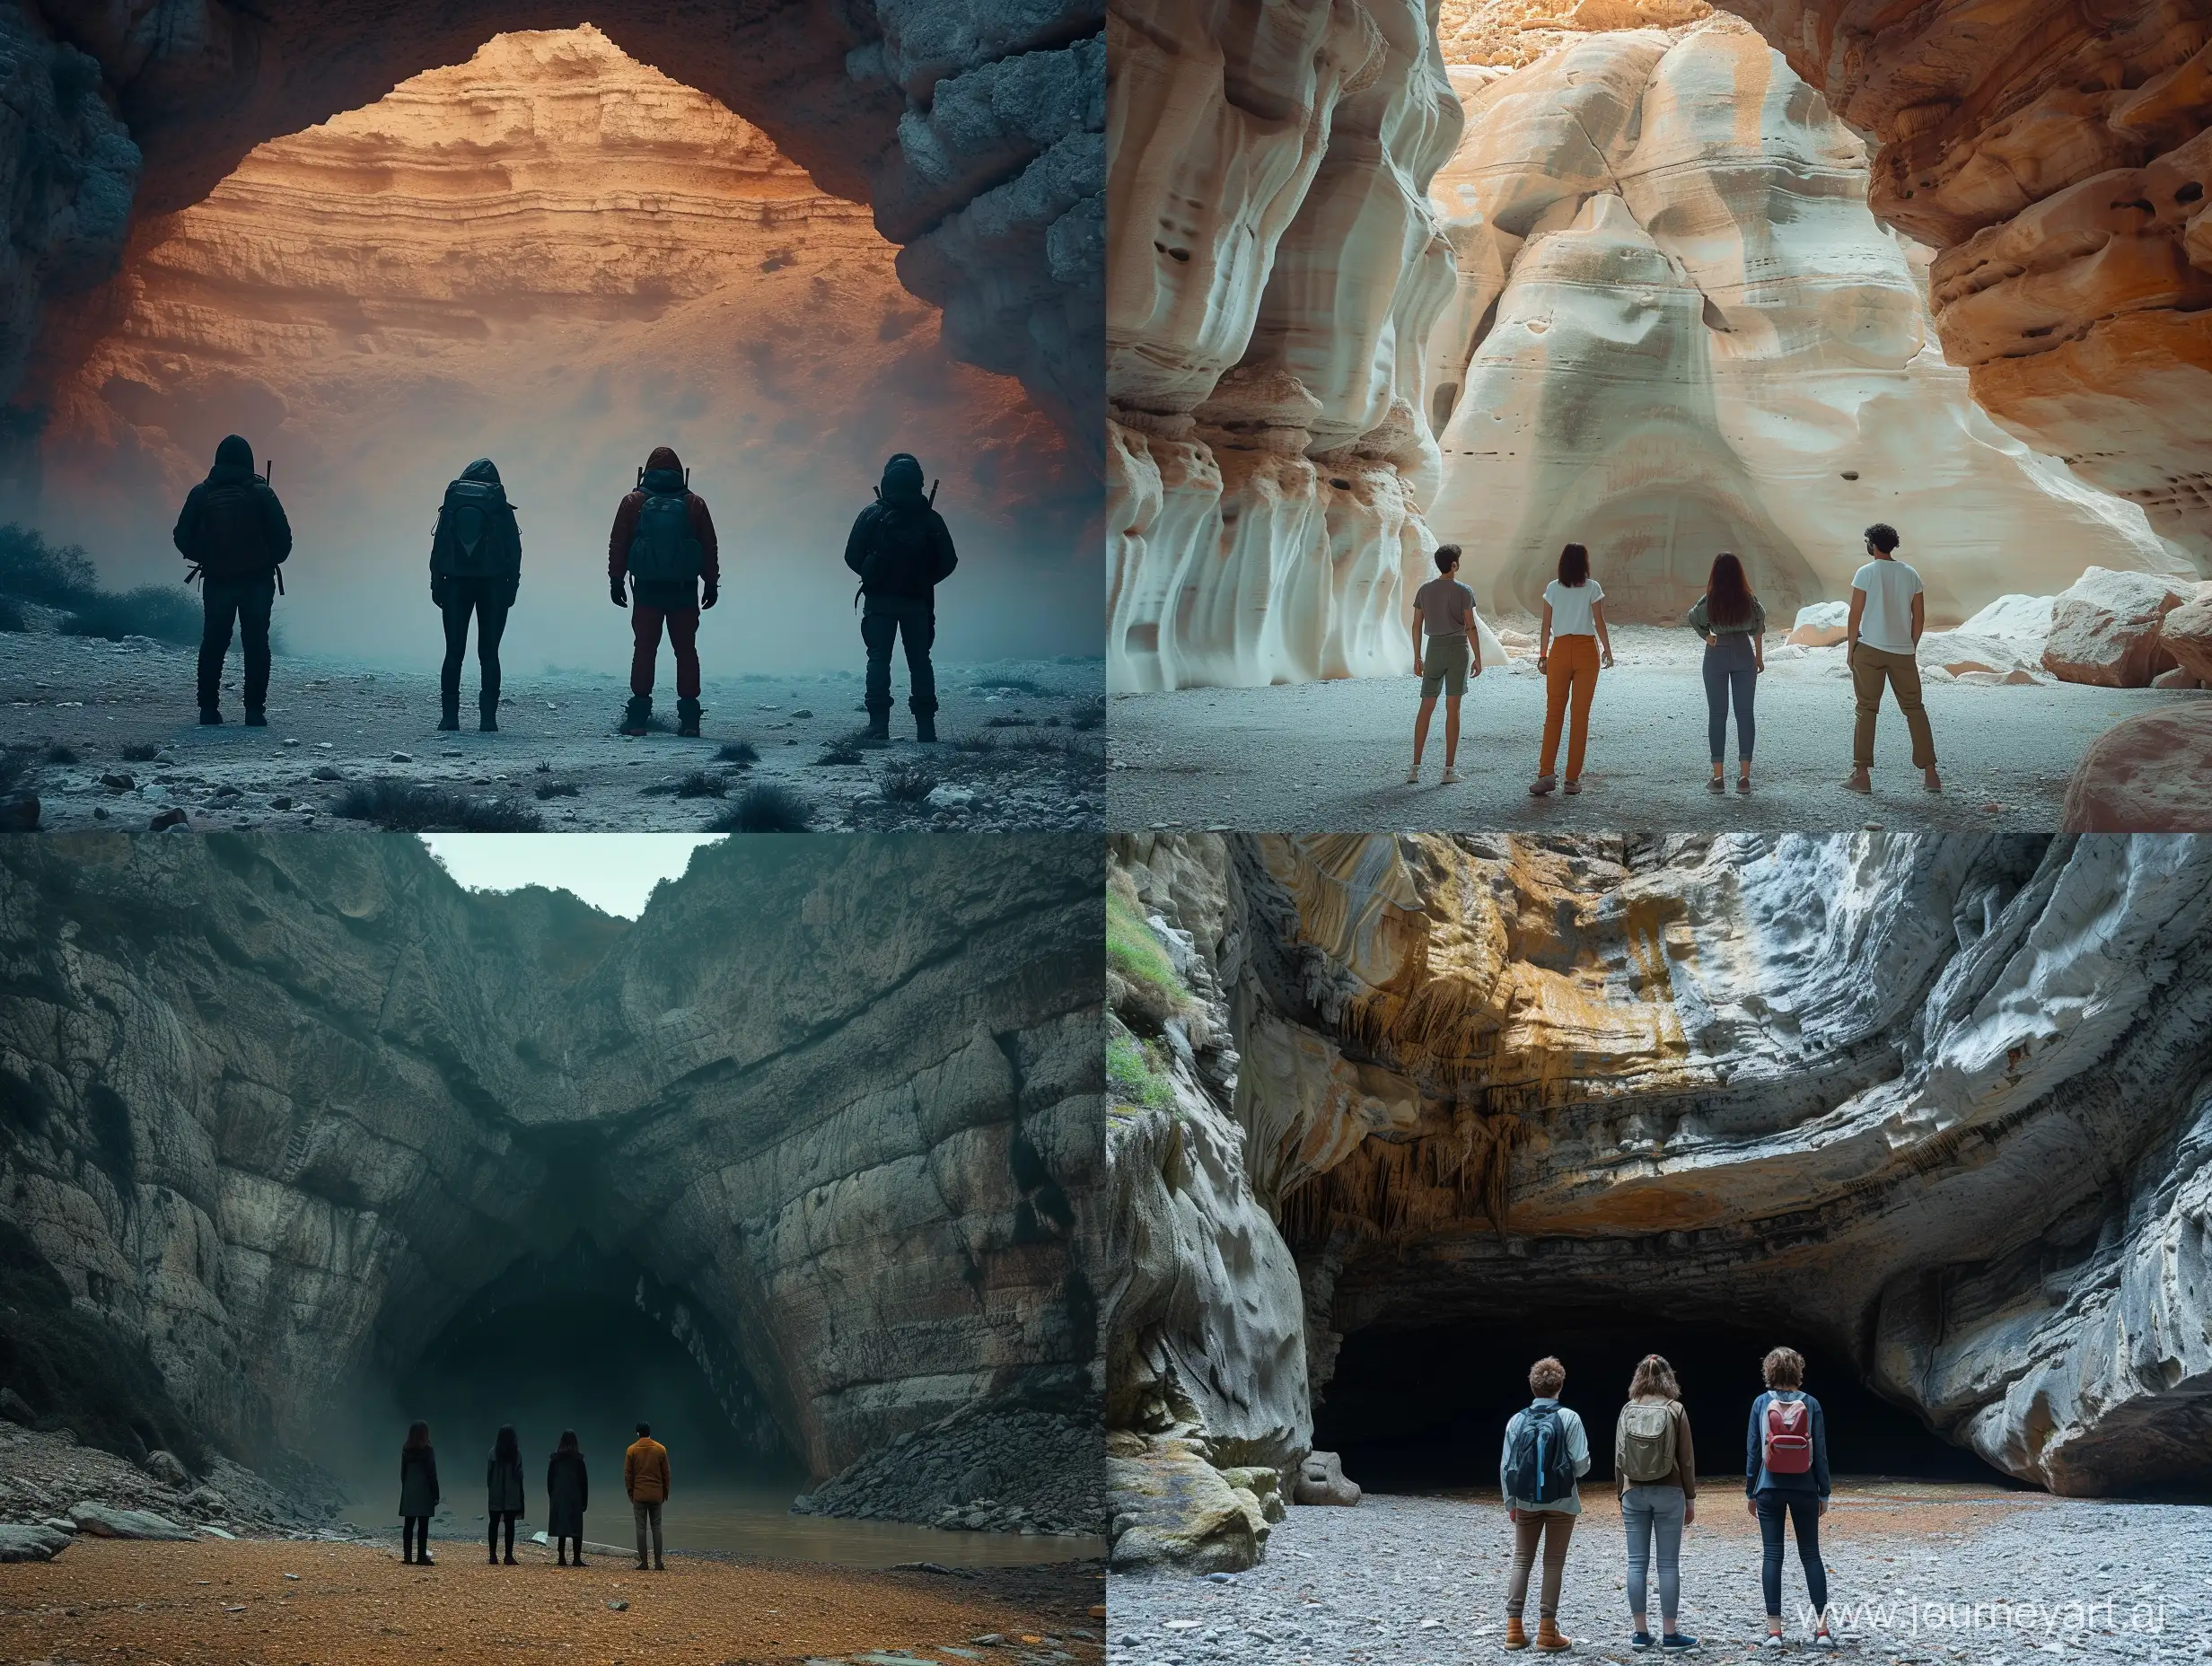 4 people standing in front of a large, mysterious cave. Very realistic image. High quality focus. Sony 50mm lens